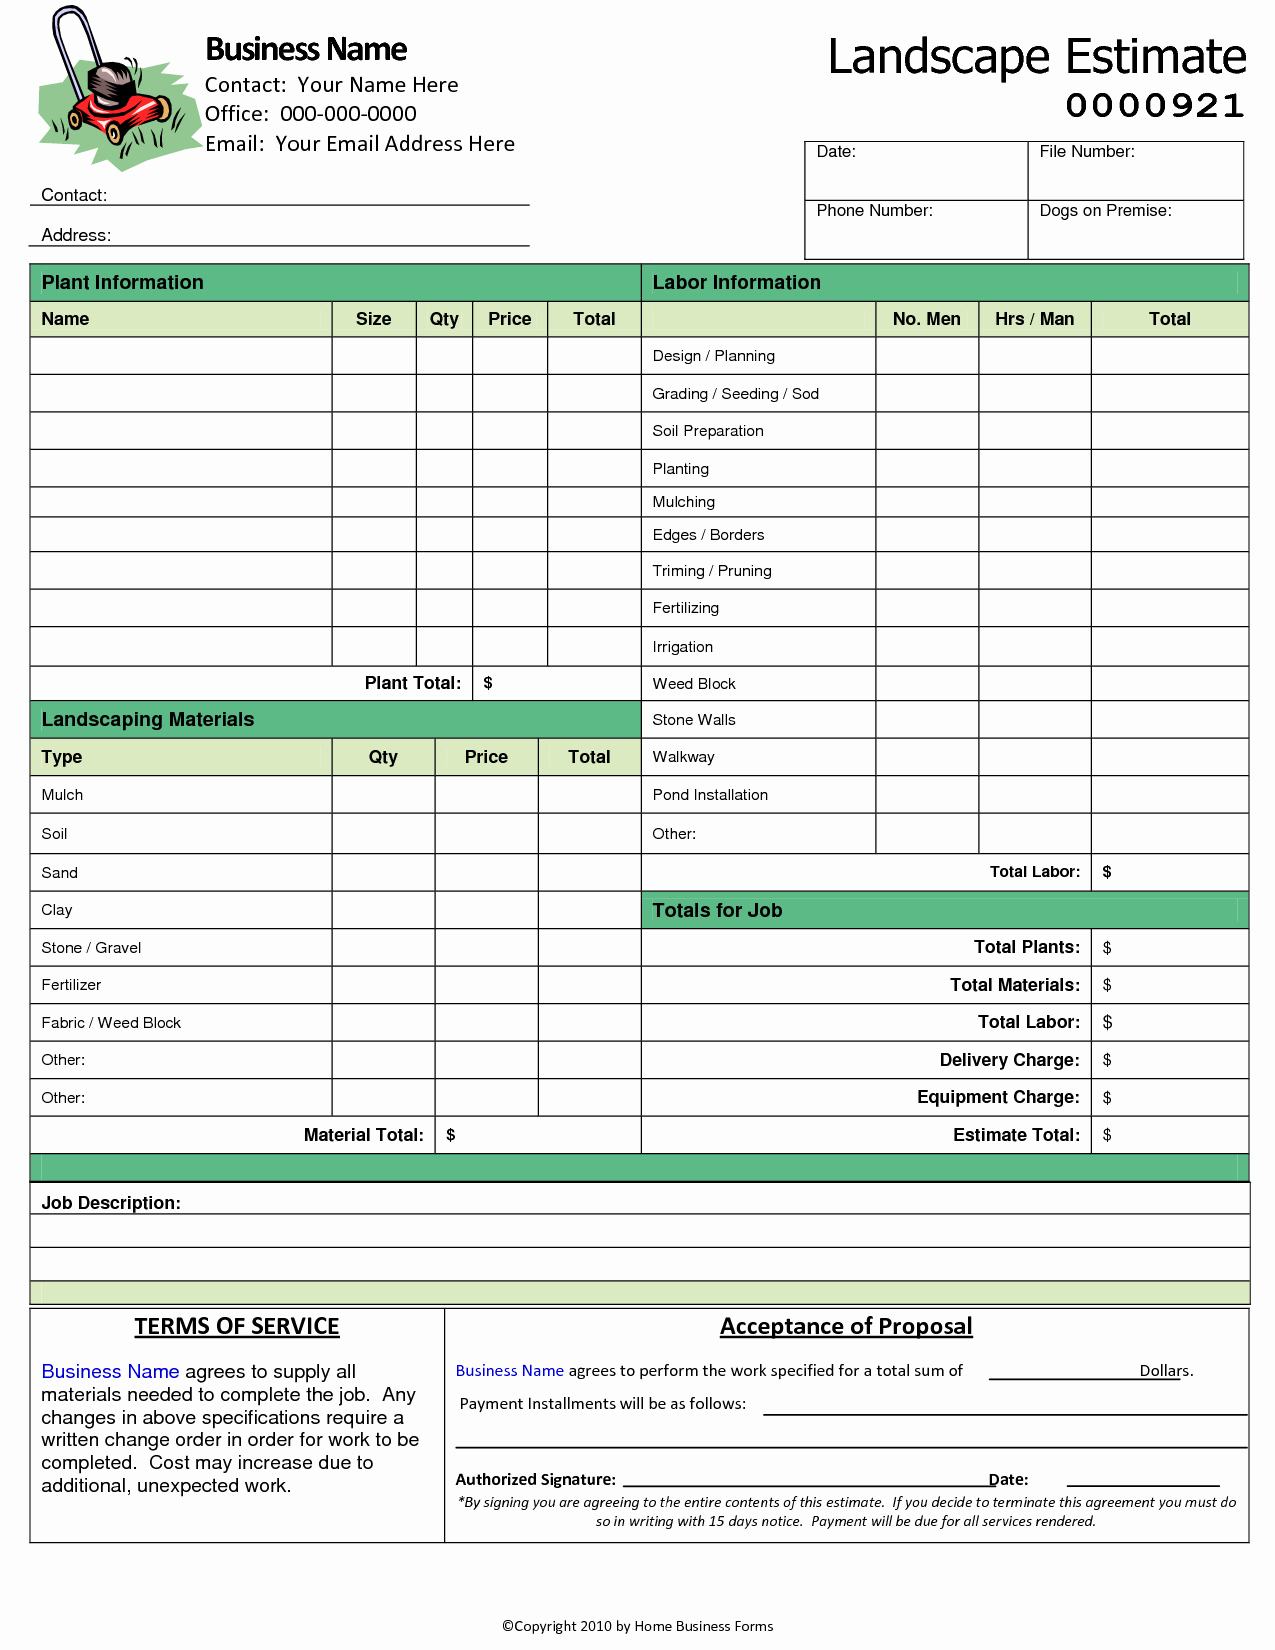 Lawn Service Proposal Template Free New 8 Best Of Printable Landscape Estimate forms Lawn